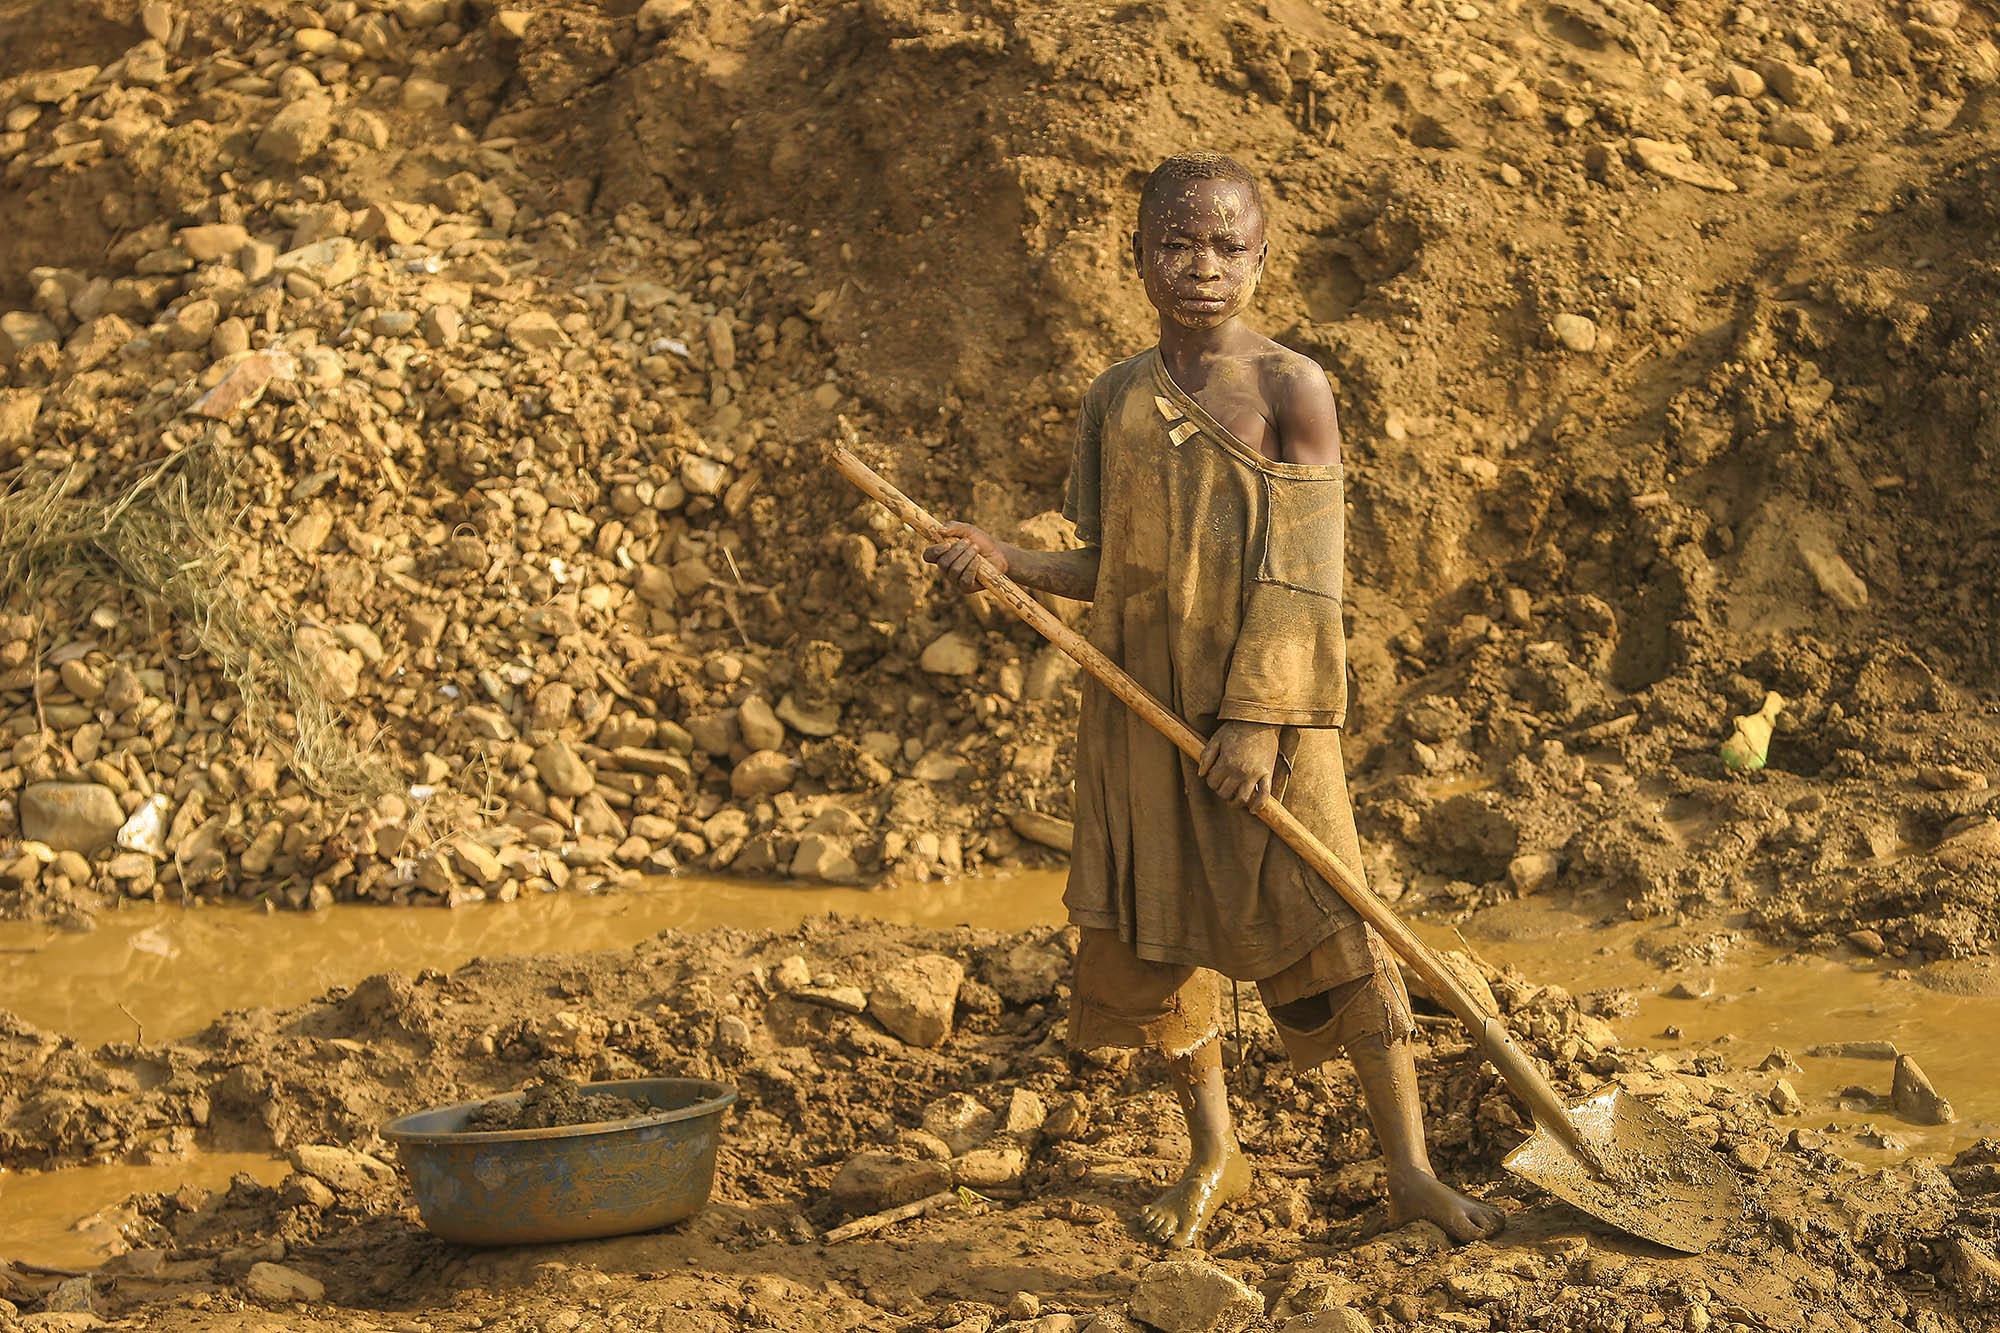 Congo -   The DRC’s rich mineral resources have fueled a...